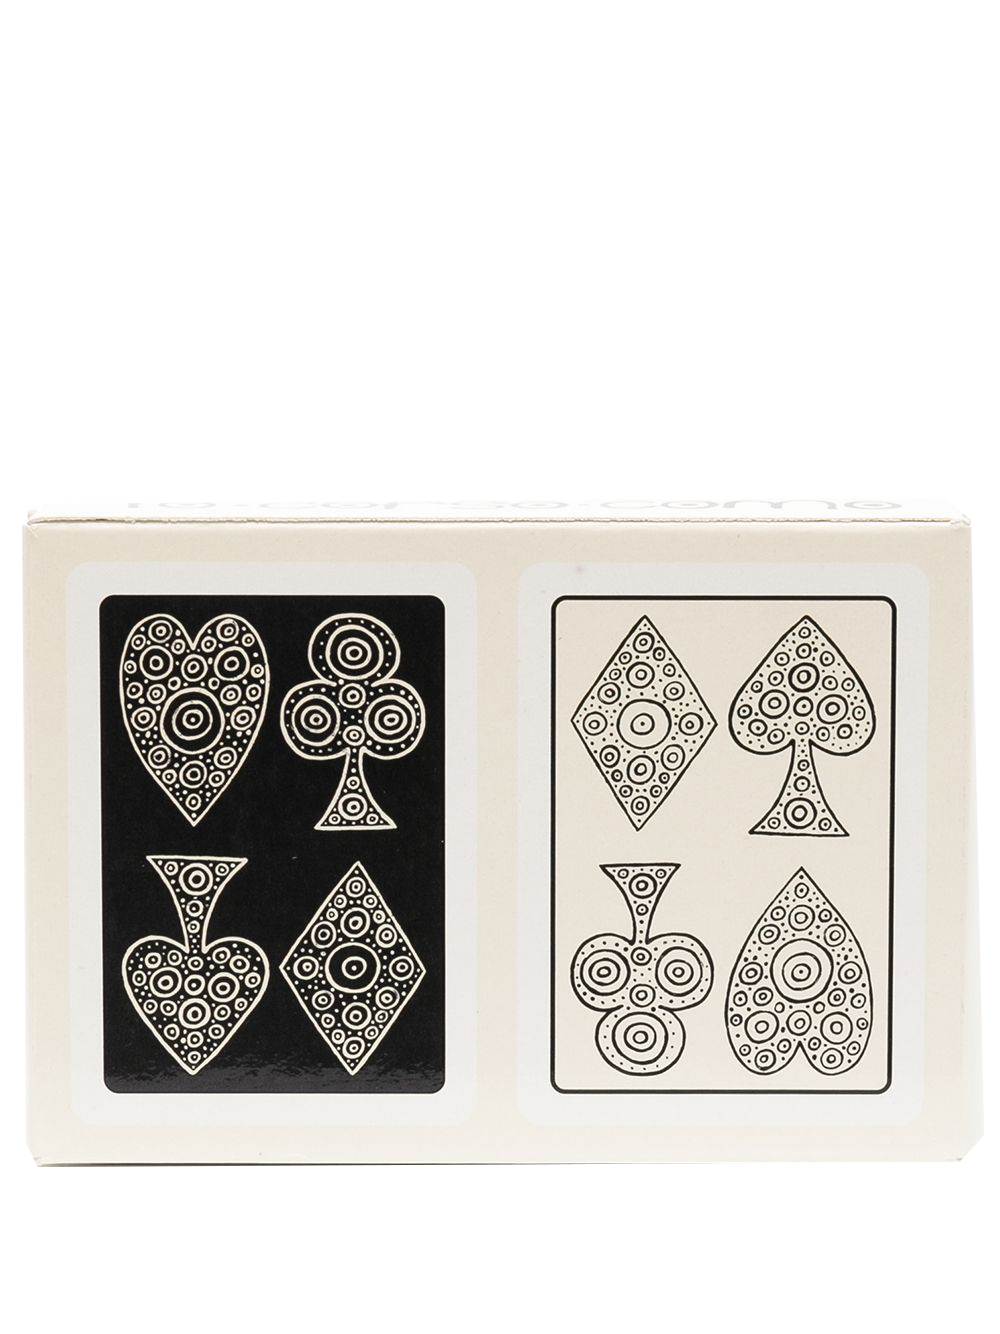 10 Corso playing cards £13